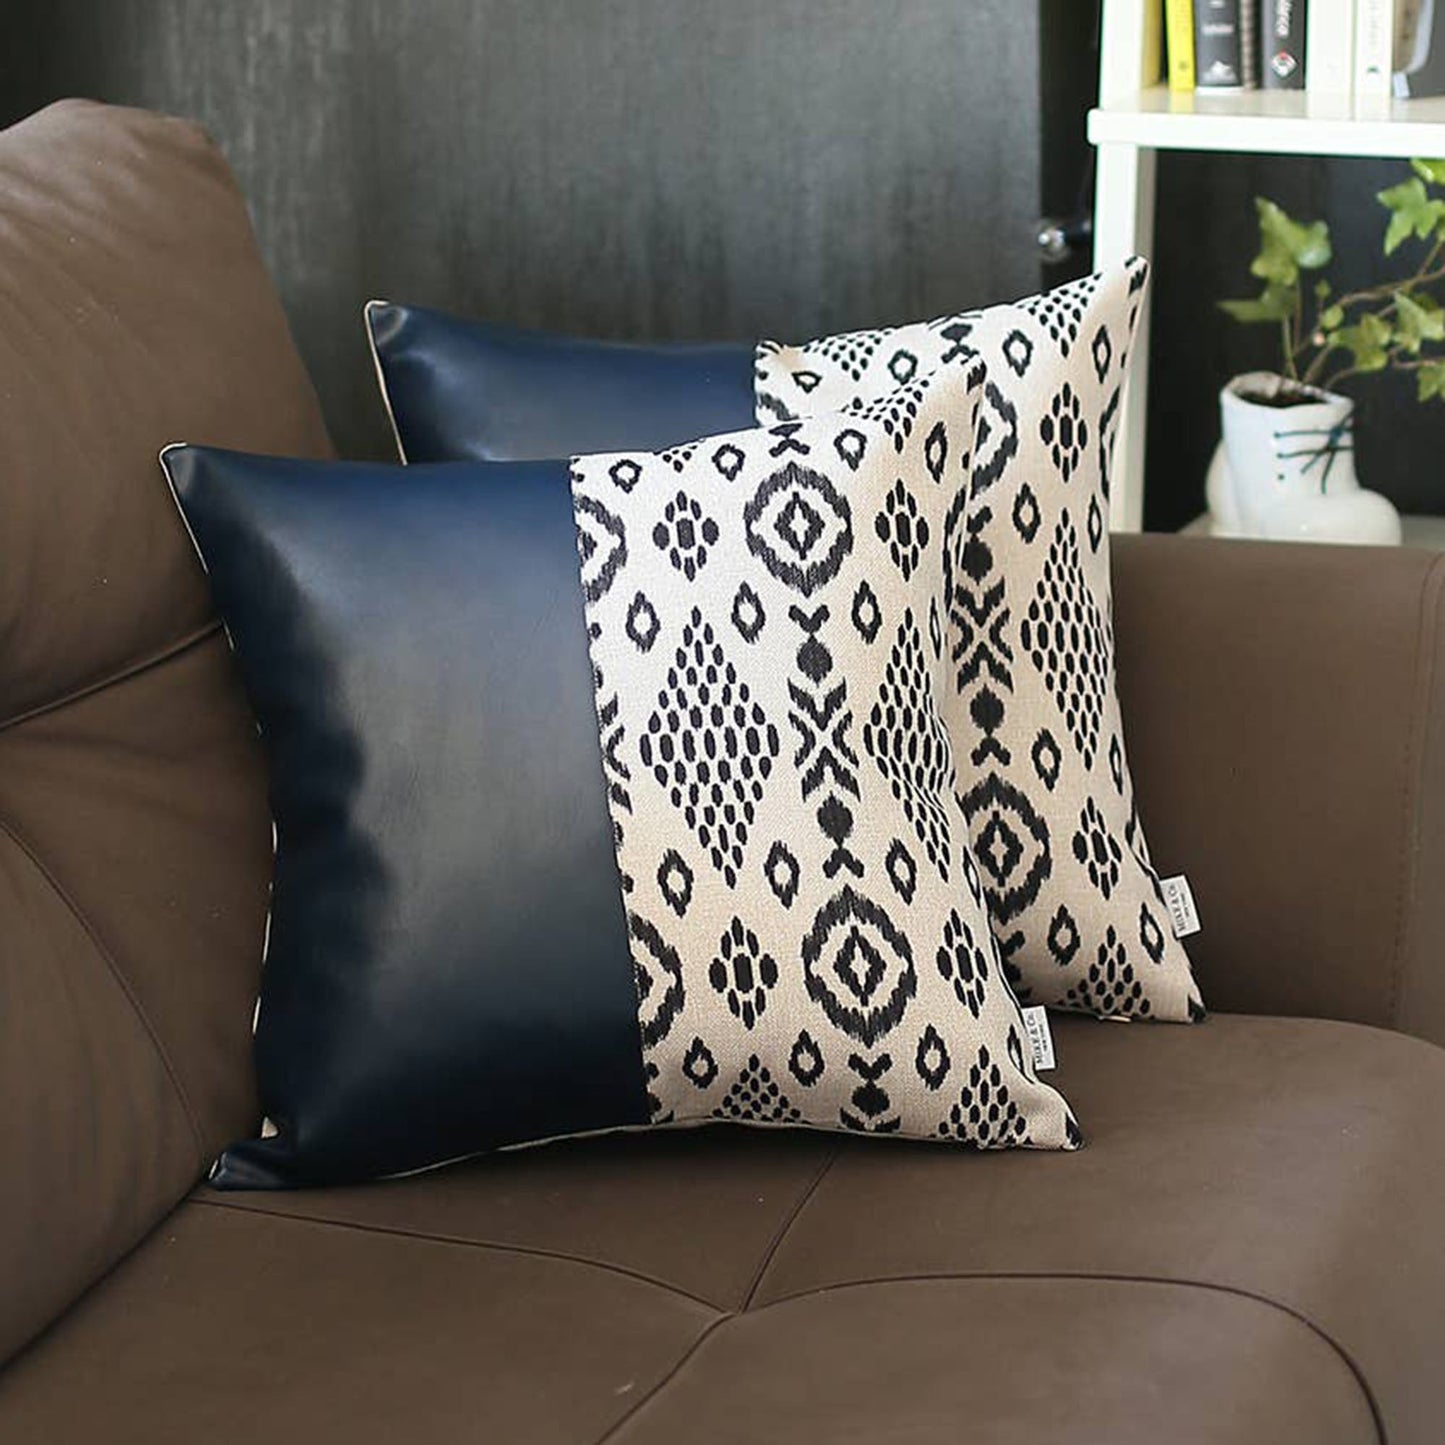 Vegan Faux Leather Handcrafted Decorative Throw Pillow Cover  (Geometric Square)